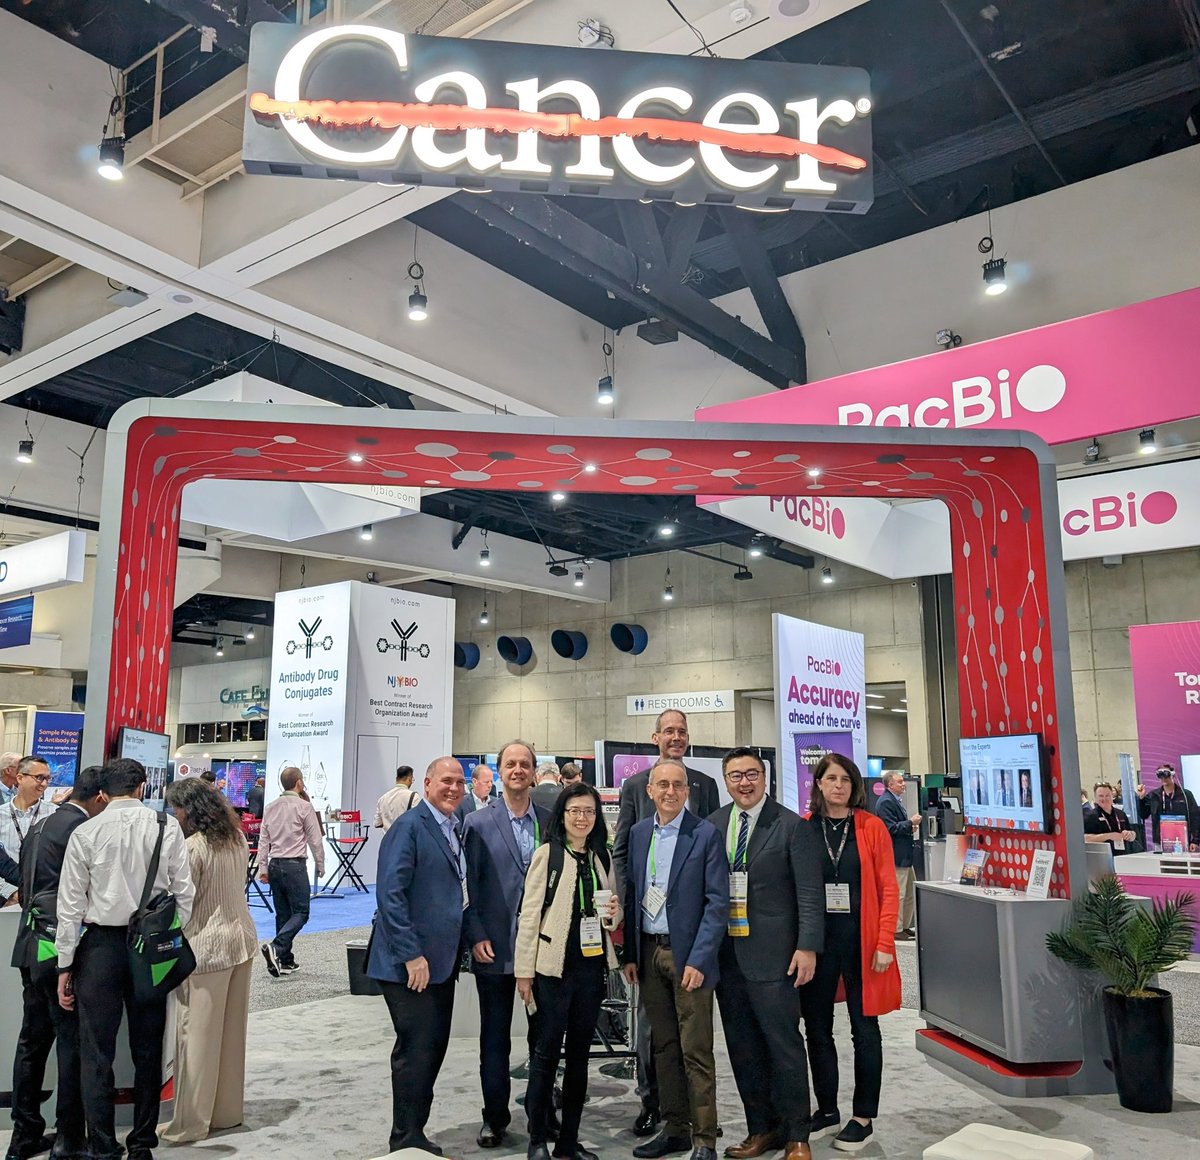 Thank you to everyone who stopped by our booth at #AACR24 to discuss the latest cancer research advances. We hope to see you all again next year. #EndCancer